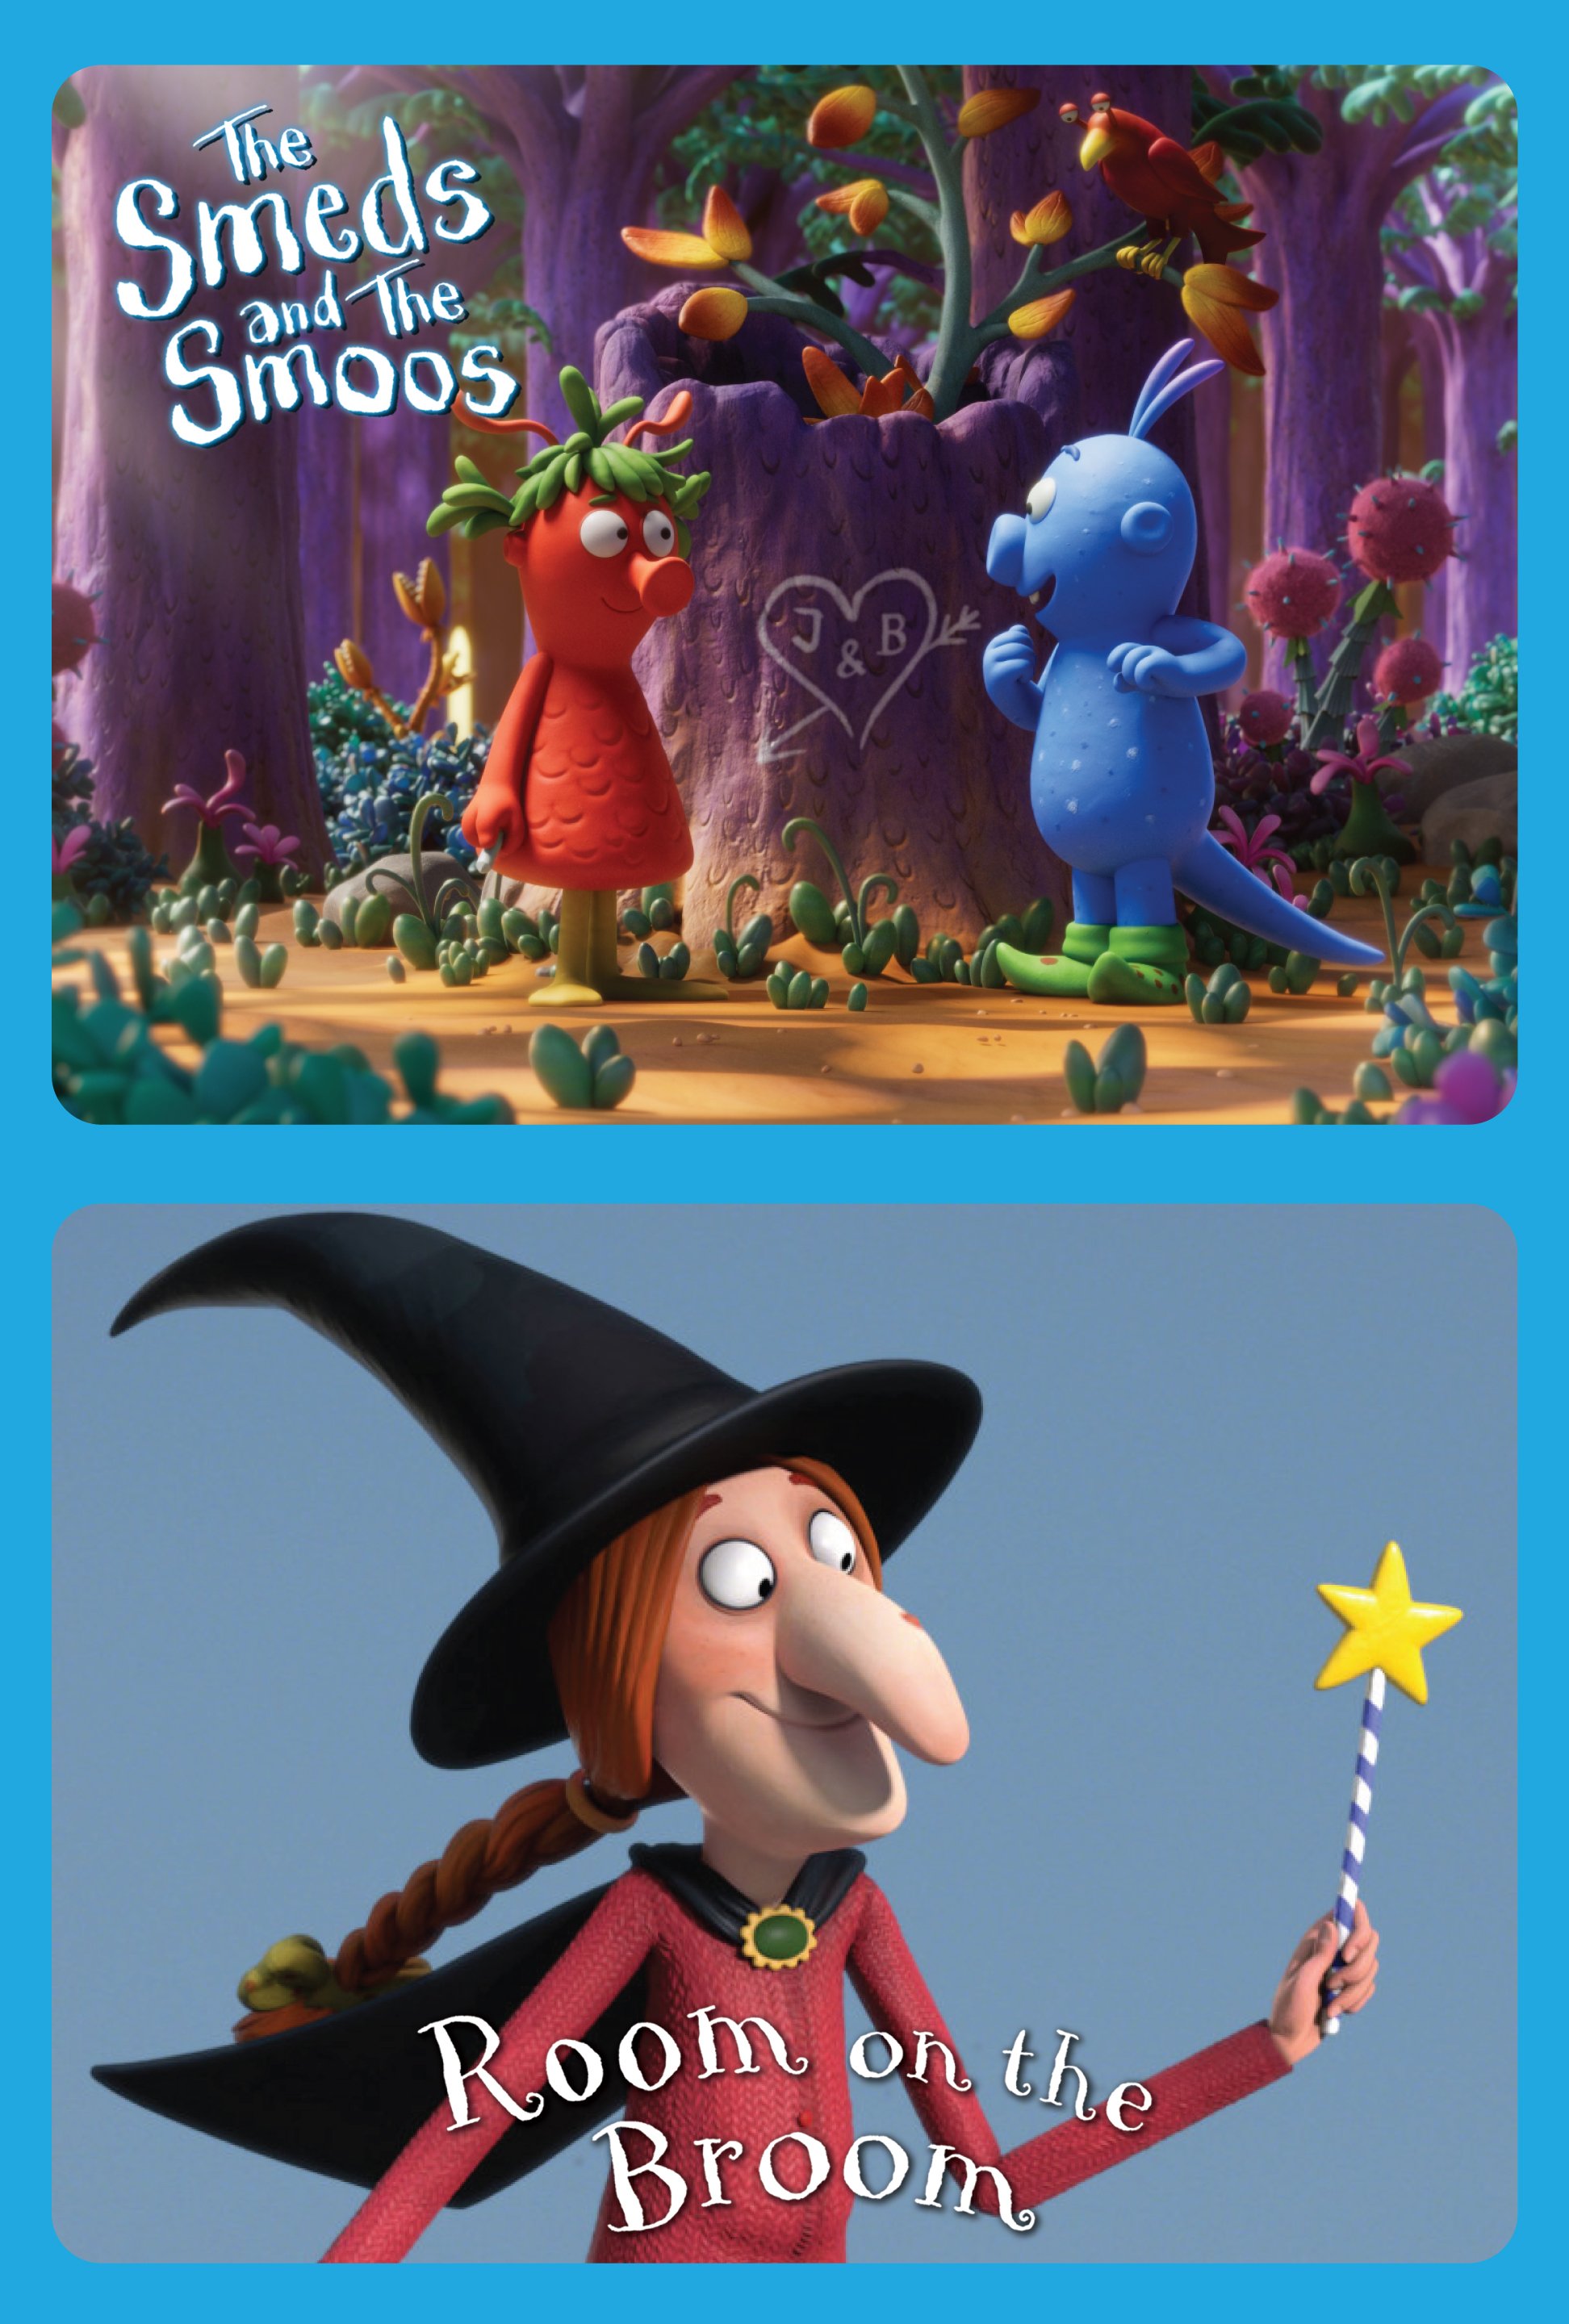 The Smeds and The Smoos/Room on the Broom